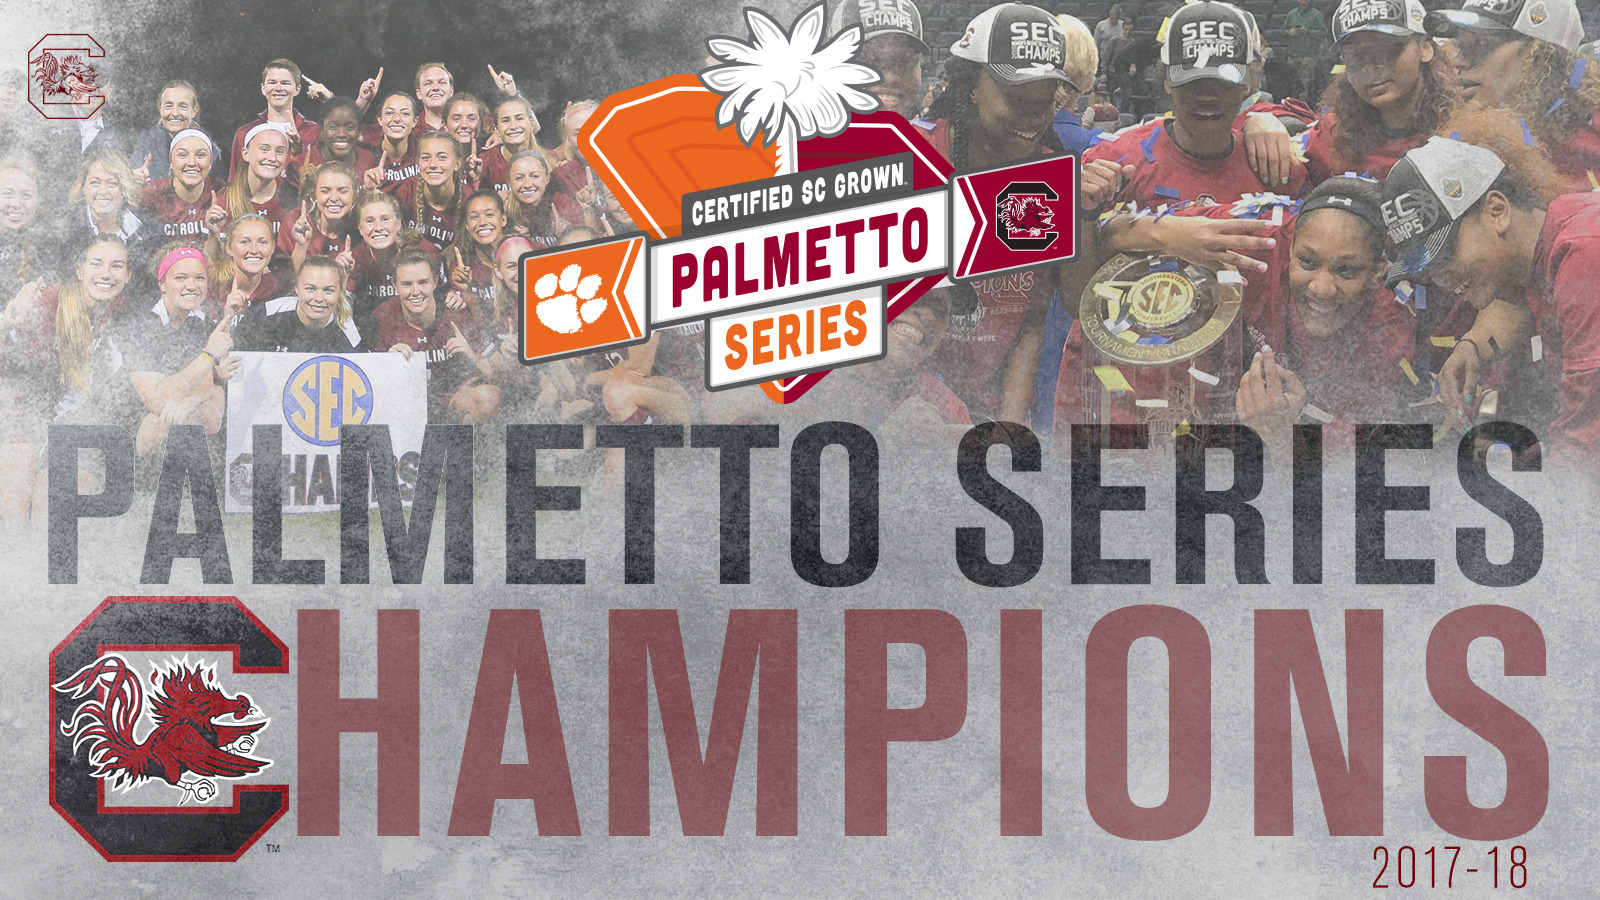 Gamecocks Win Certified SC Grown Palmetto Series Third Year in a Row